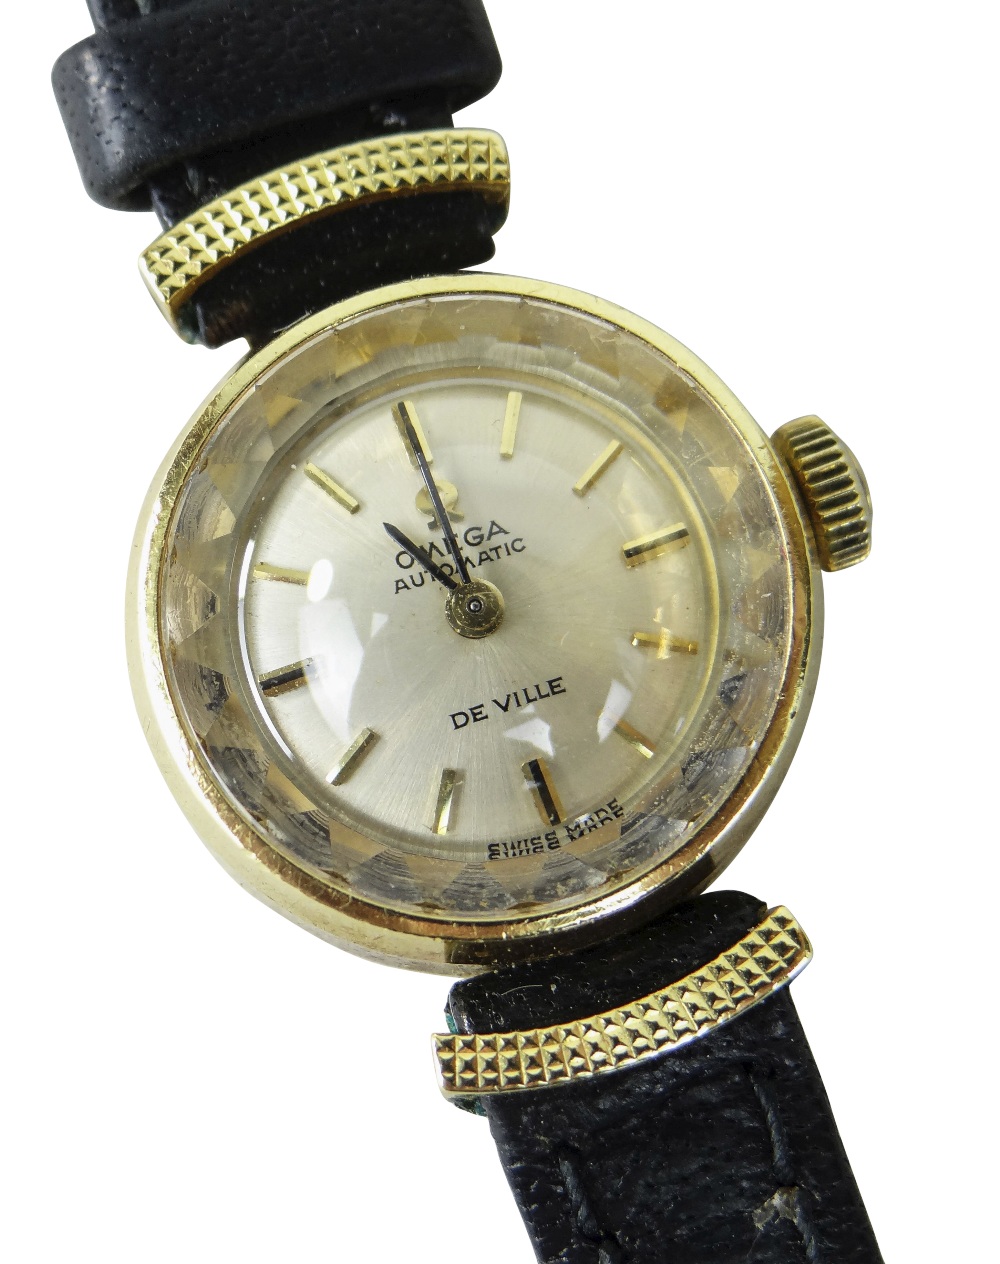 18K YELLOW GOLD LADIES OMEGA AUTOMATIC DE VILLE WRISTWATCH, numbered to inside of back cover '